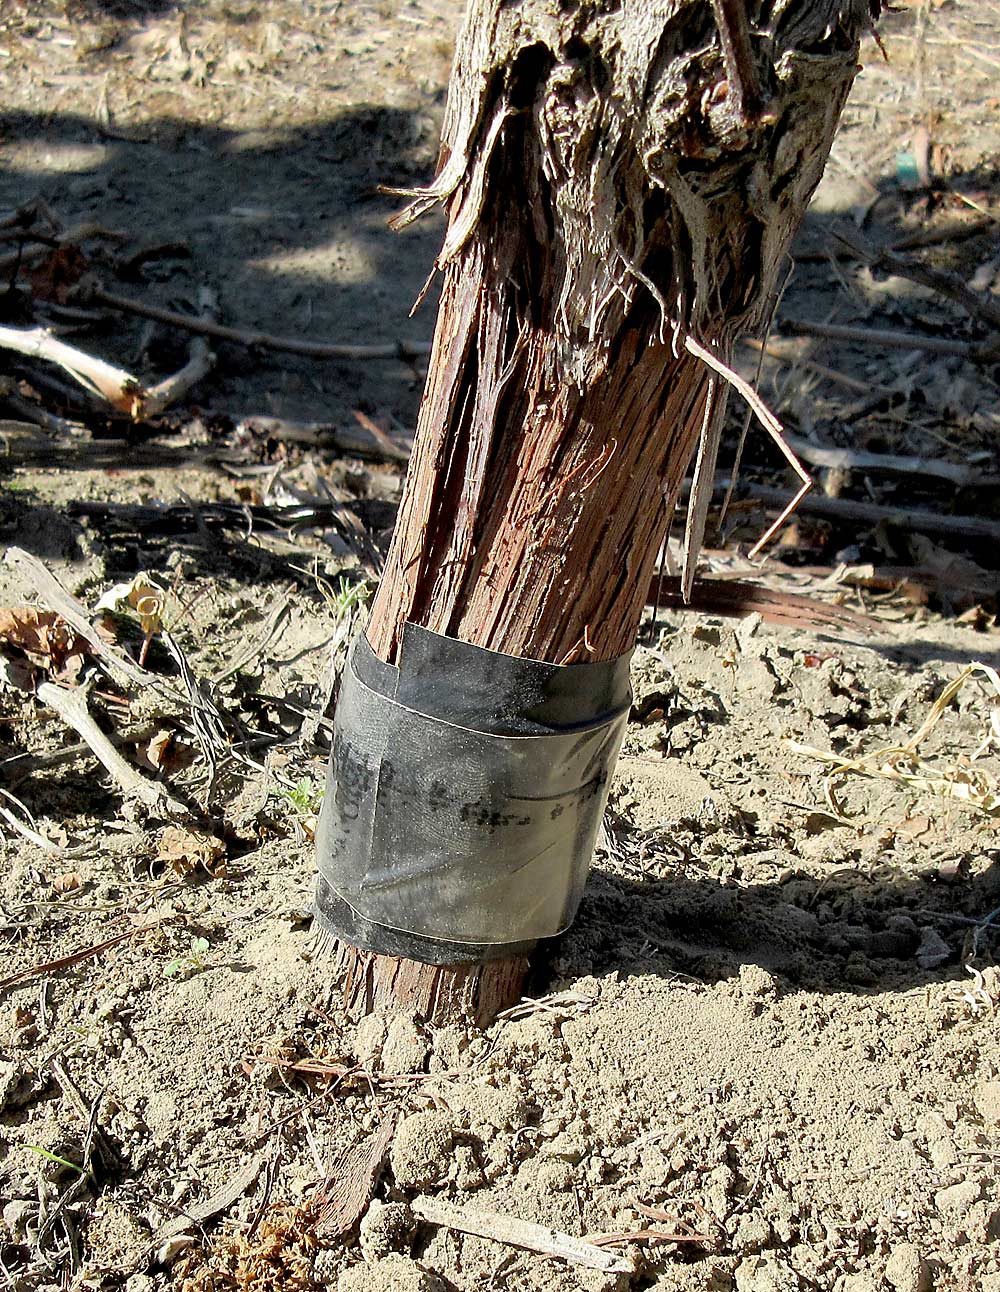 Doug Walsh deploys a two-sided sticky tape trap (electrical tape and sticky tape wrapped around the base of a grapevine trunk) to look for phylloxera crawlers climbing above ground. He has used this method in the past to monitor for scale and grape mealybug crawlers in the canopy in the spring. (Courtesy Doug Walsh)